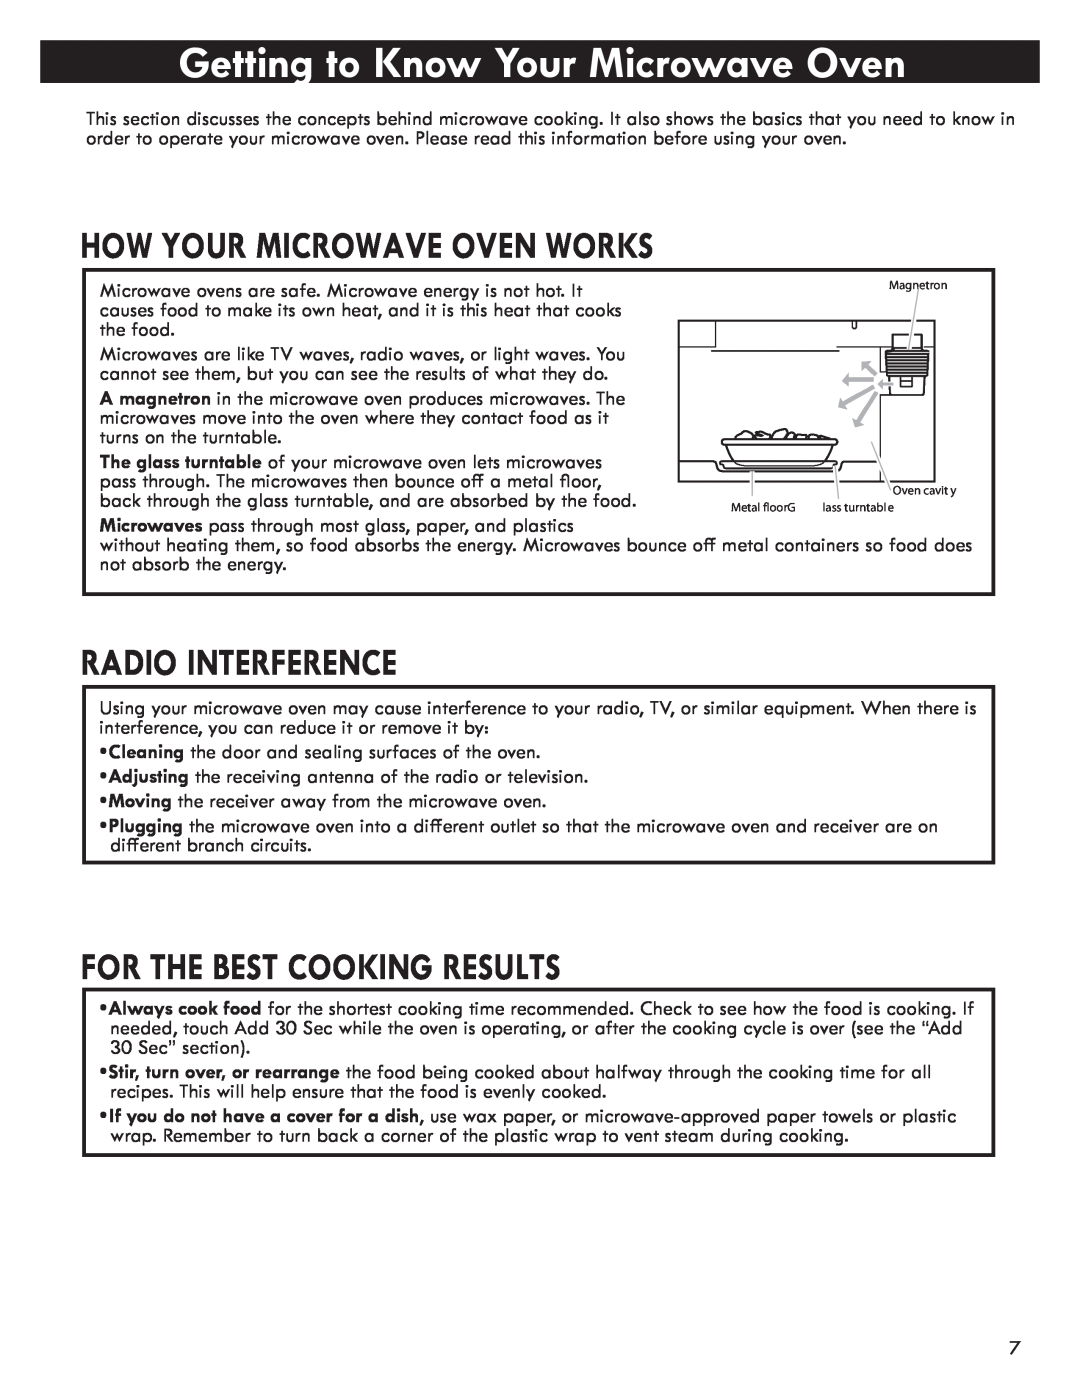 Kenmore 721.8502 manual Getting to Know Your Microwave Oven, How Your Microwave Oven Works, Radio Interference 